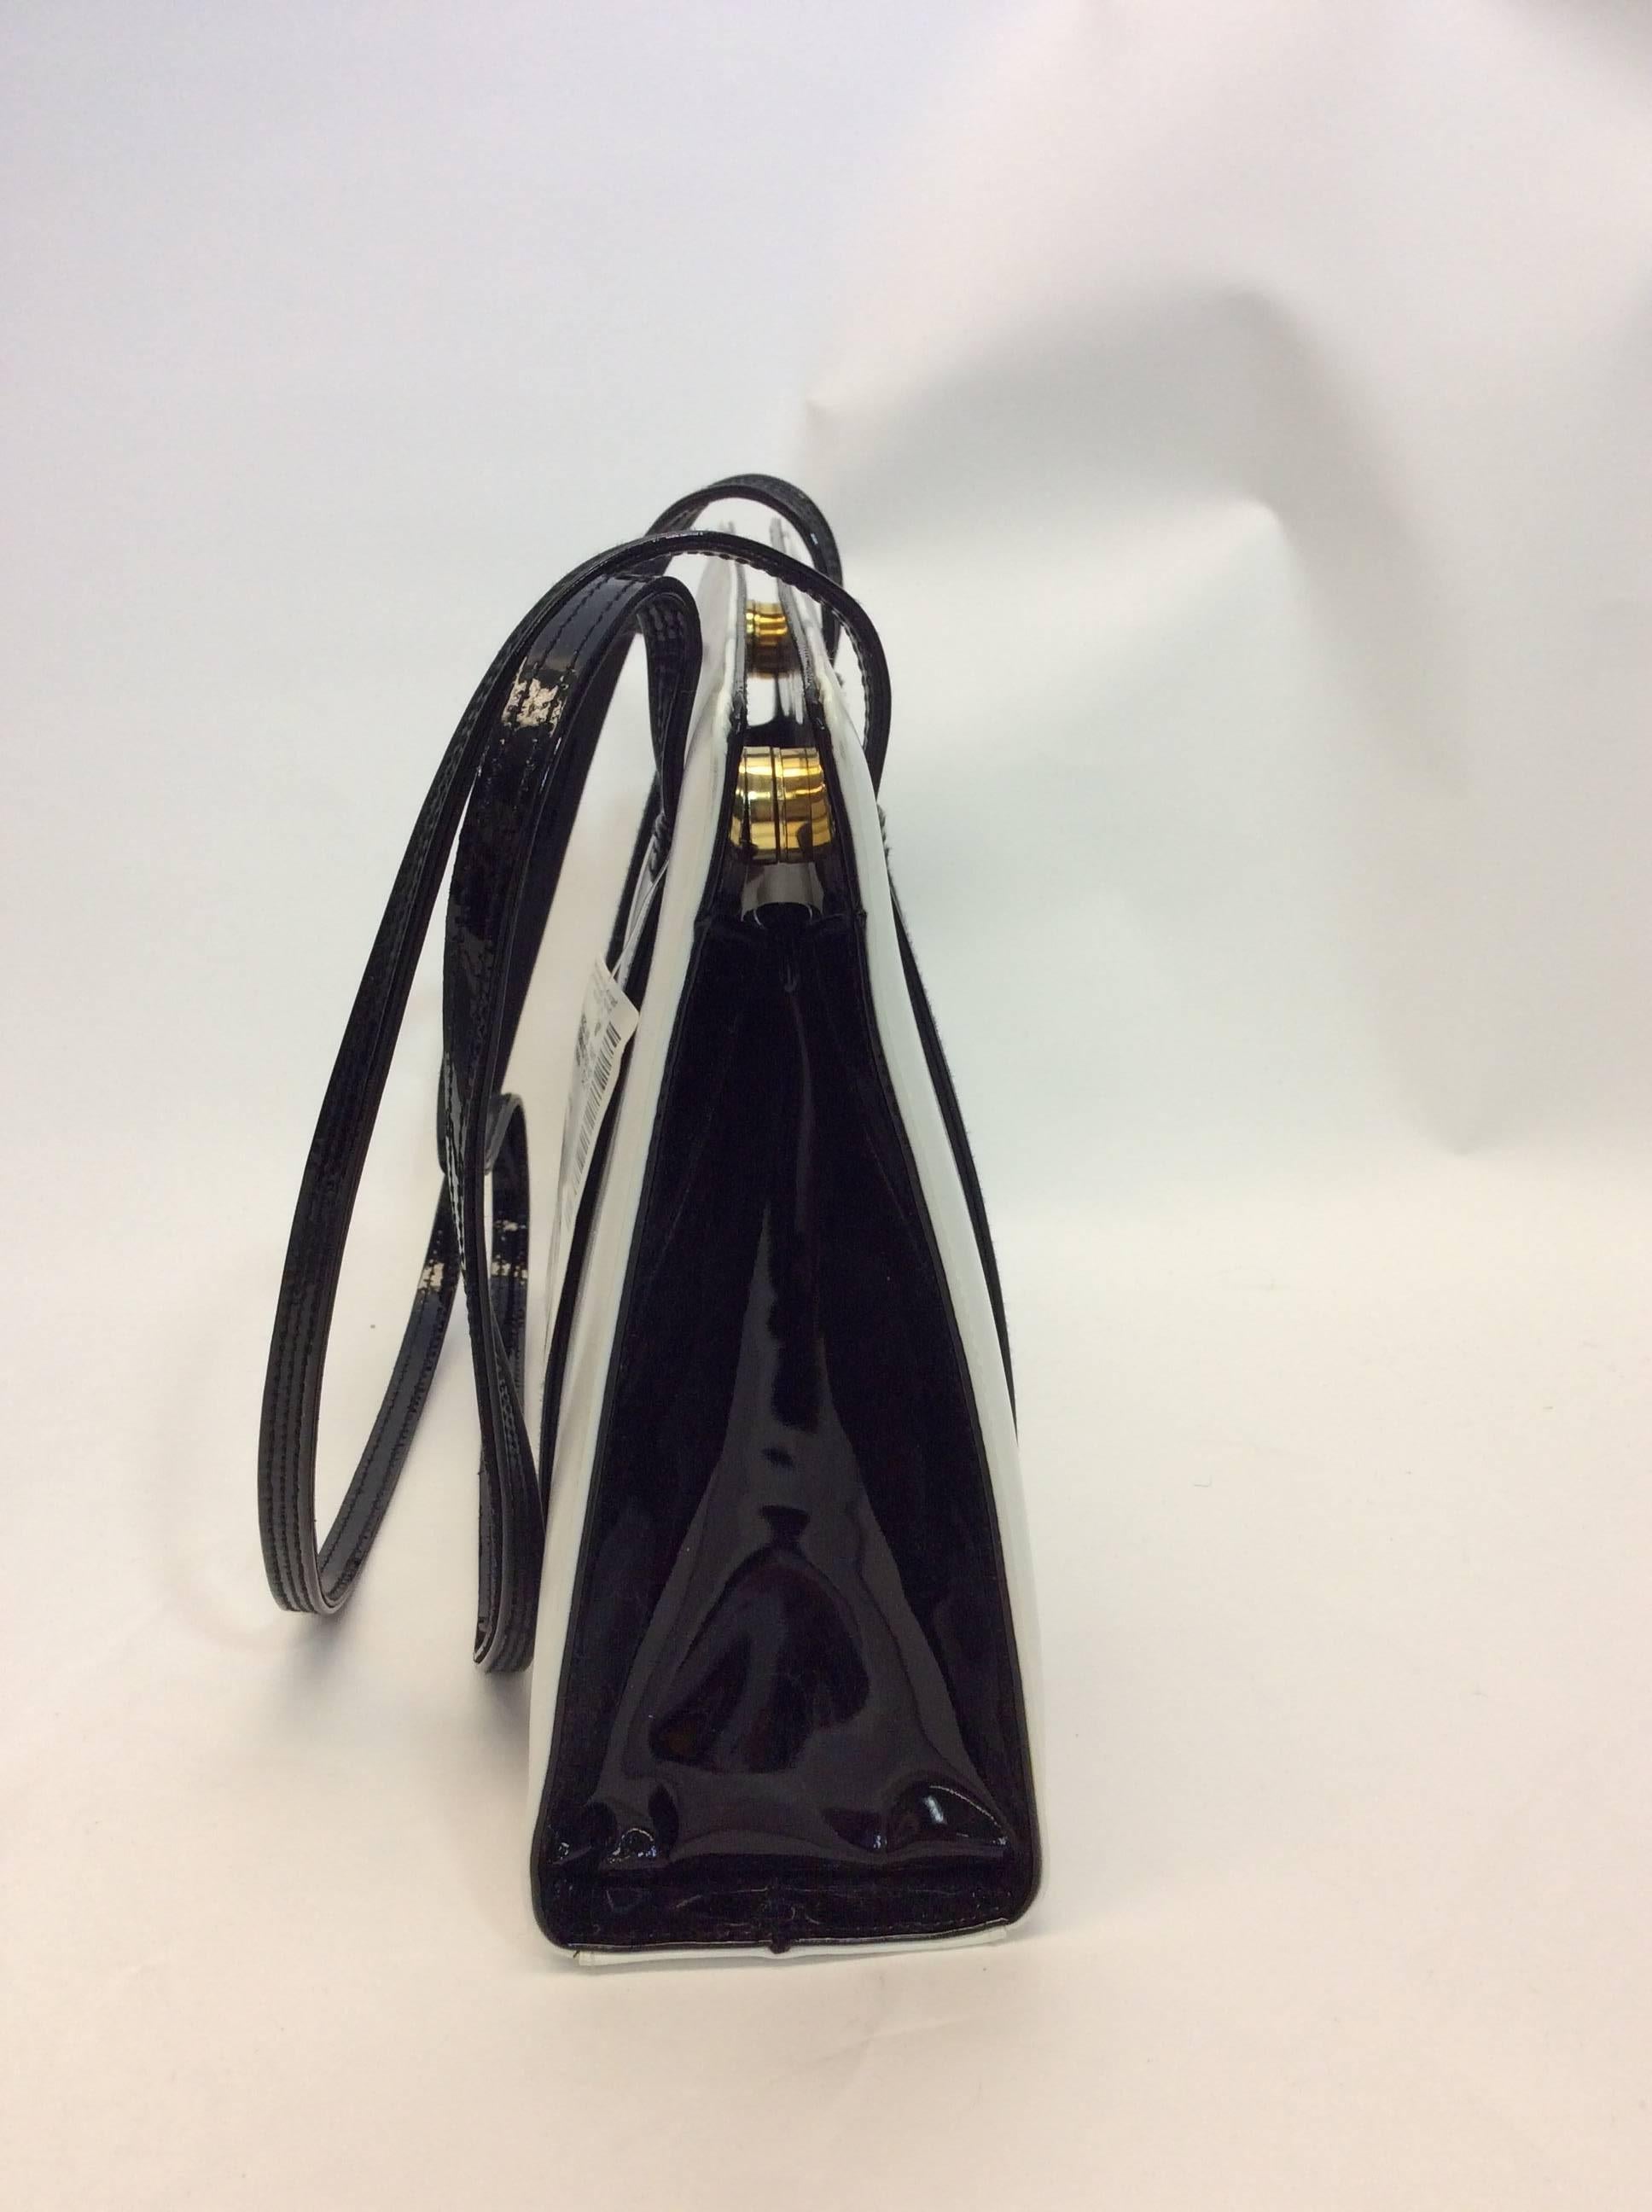 Salvatore Ferragamo NWT Two Tone Shoulder Bag
Original price: $350
Made in Italy
Patent leather black straps on white bag
11X8.5X4
Magnetic closure
